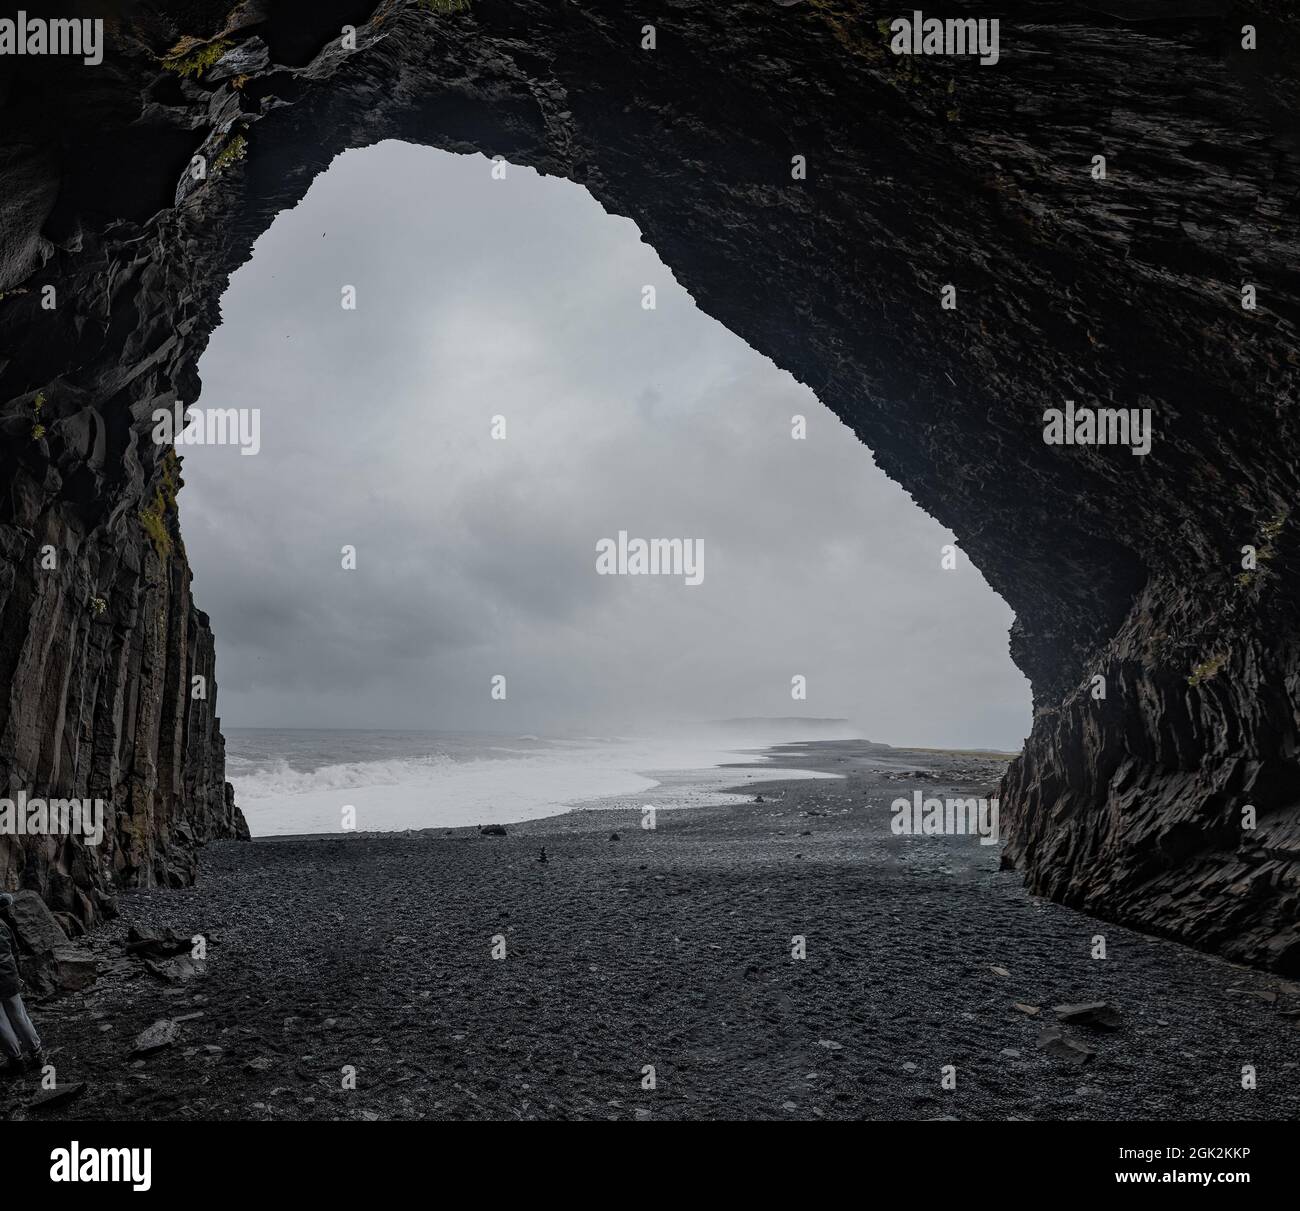 Panoramic view  of Reynisfjara beach cave in Iceland with big basalt pillars and rocky beach. Cold windi place at the beach with big waves. Stock Photo